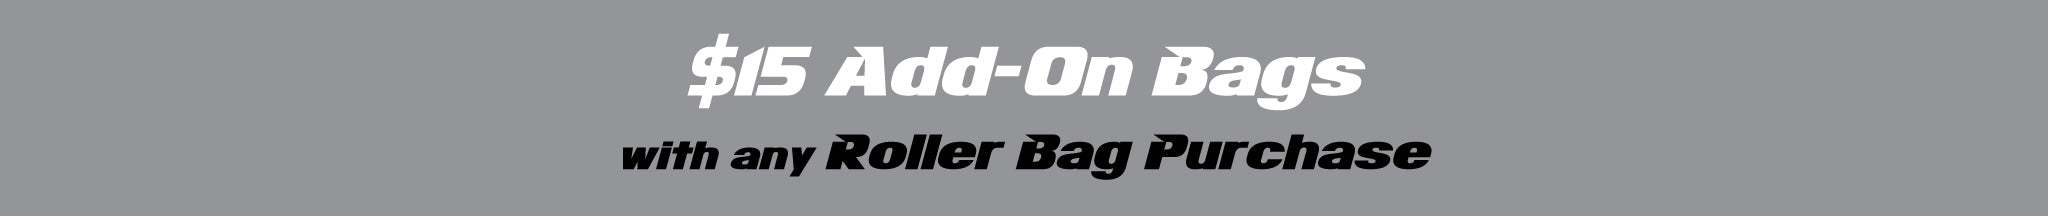 Tenth Frame Bag Special - Buy a Roller Bag and Get an Add-On Bag for only $15!